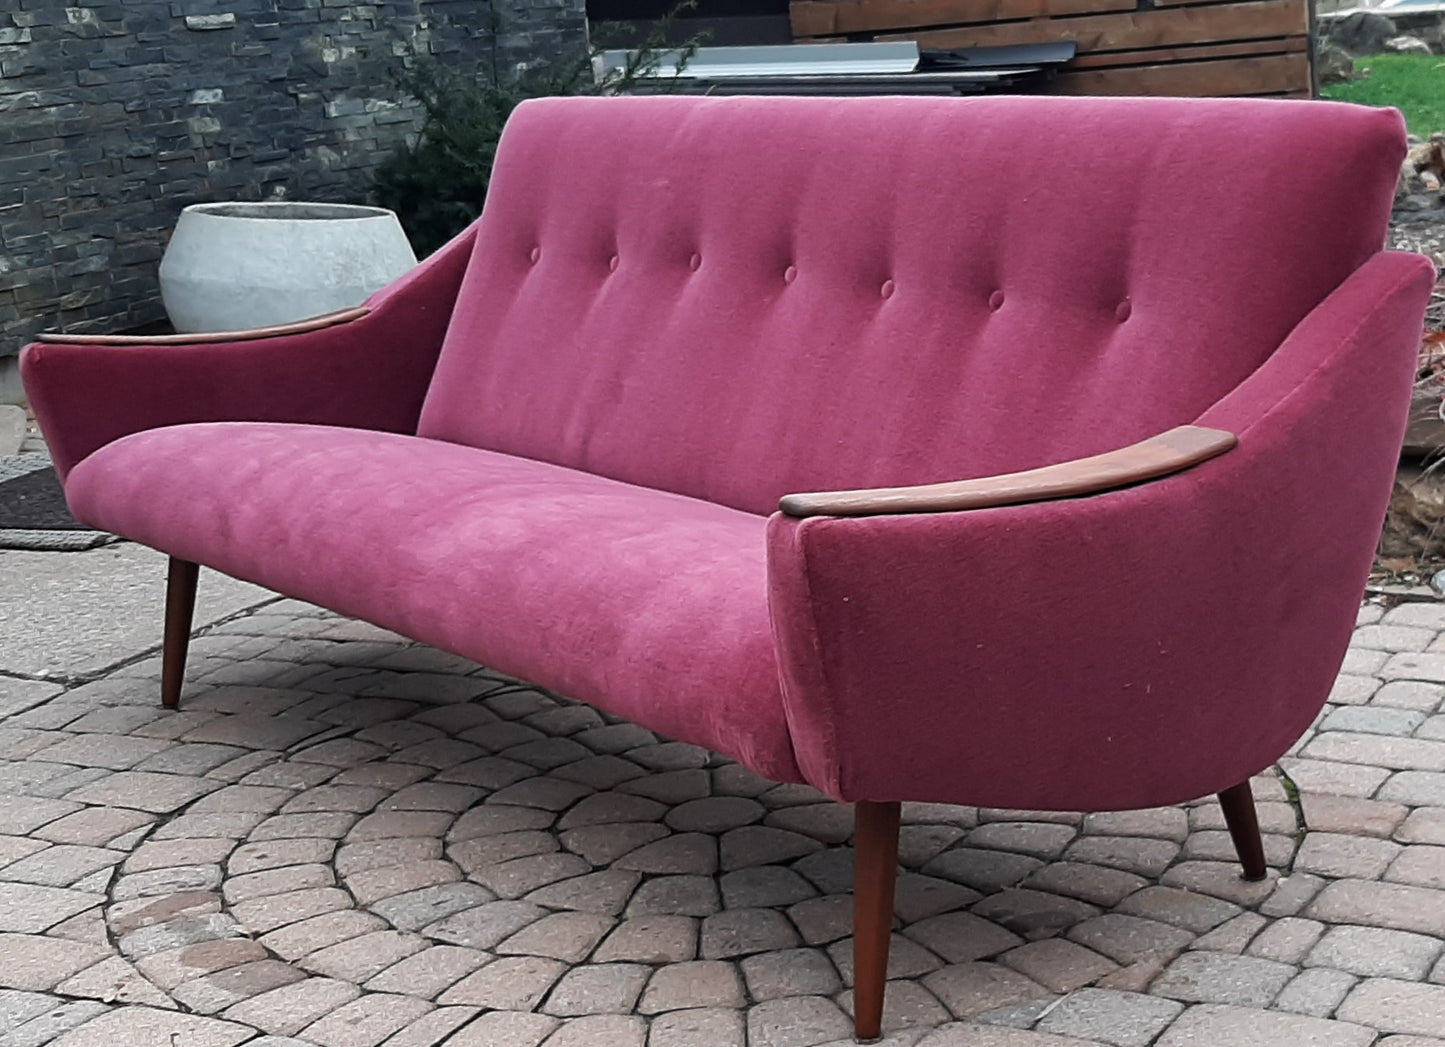 REFINISHED REUPHOLSTERED Danish MCM Sofa in Wool Mohair - PERFECT